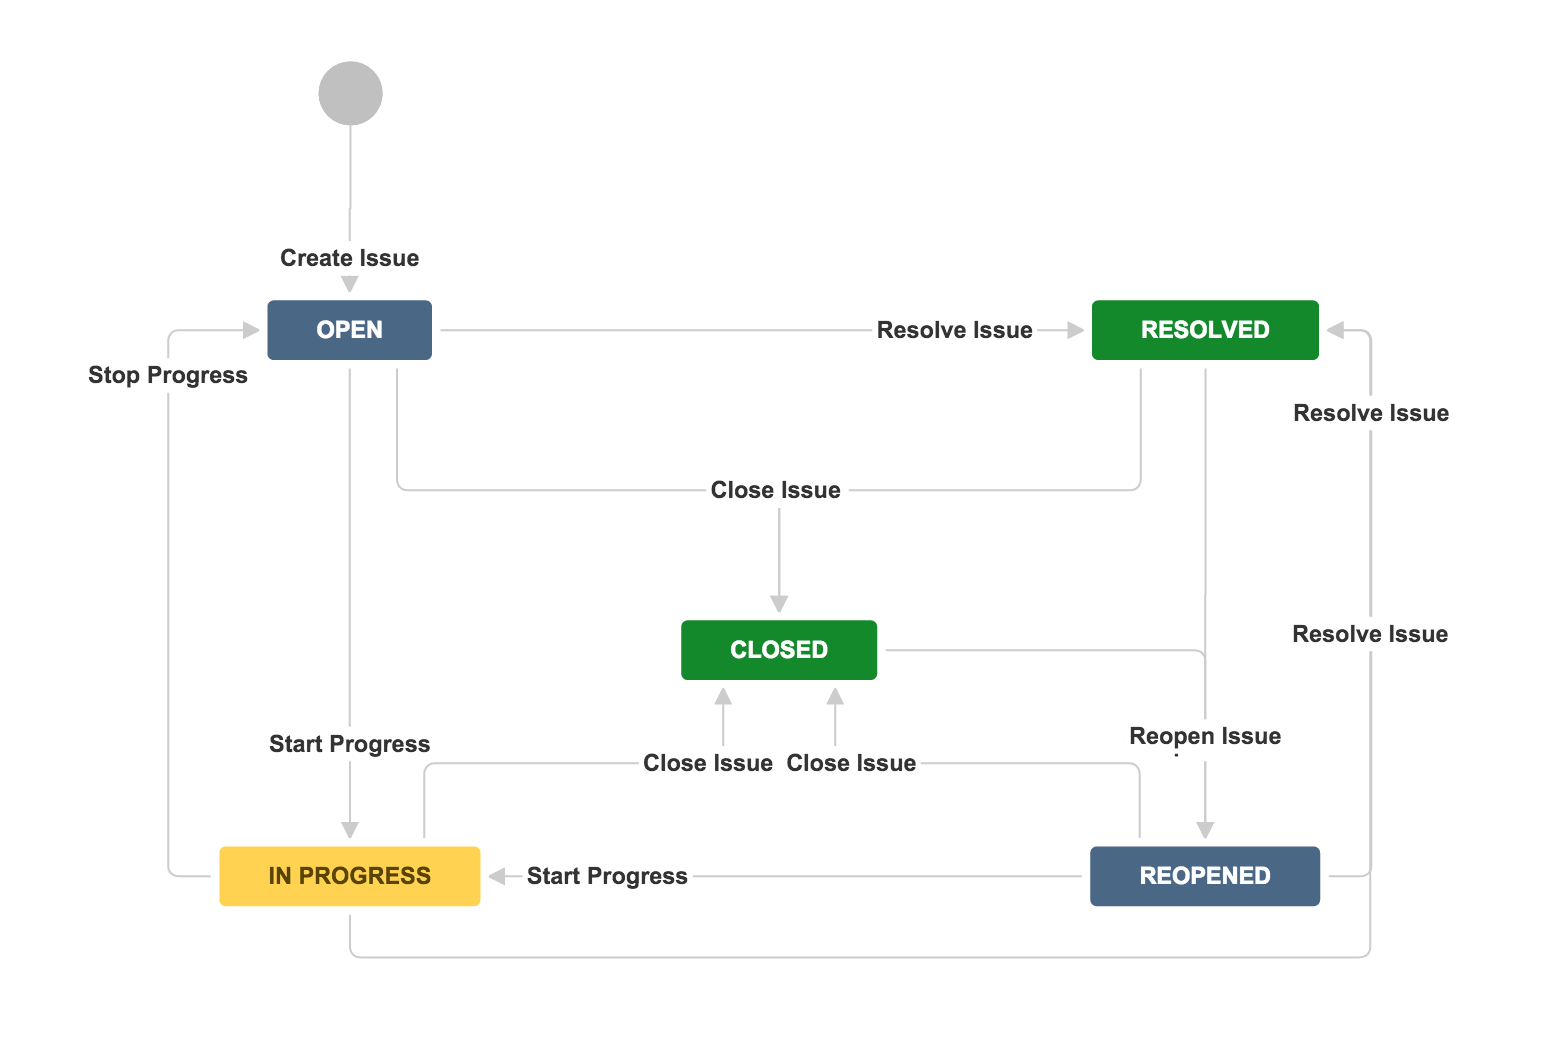 Jira Software workflow status, moving between "Open", "In progress", "Resolved", "Reopened", and "Closed"